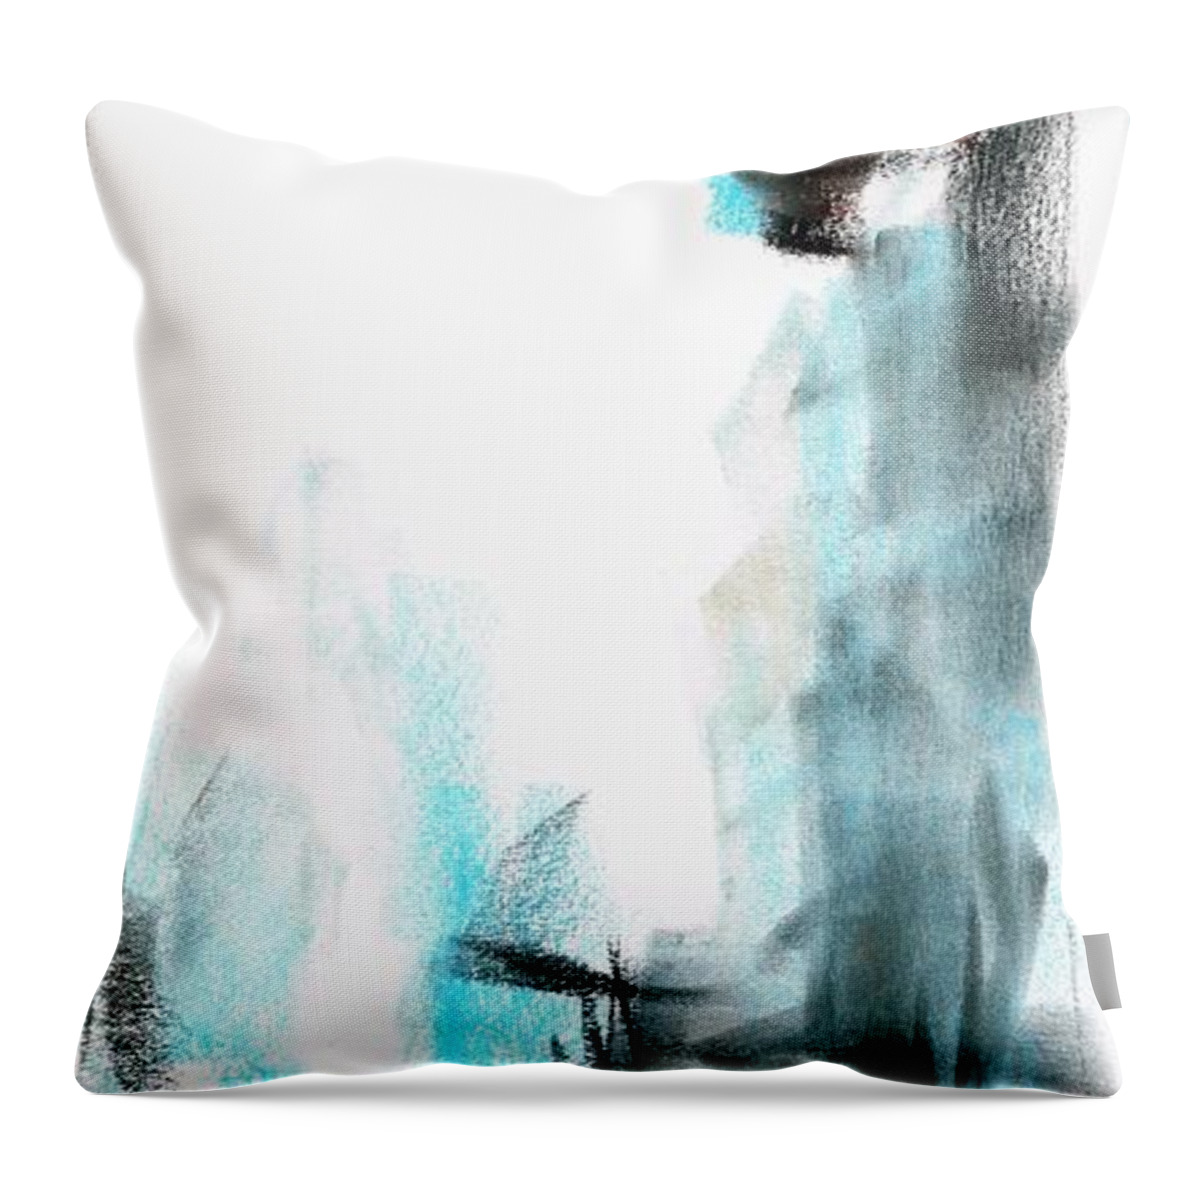 Equine Art Throw Pillow featuring the painting New Mexico Horse Four by Frances Marino